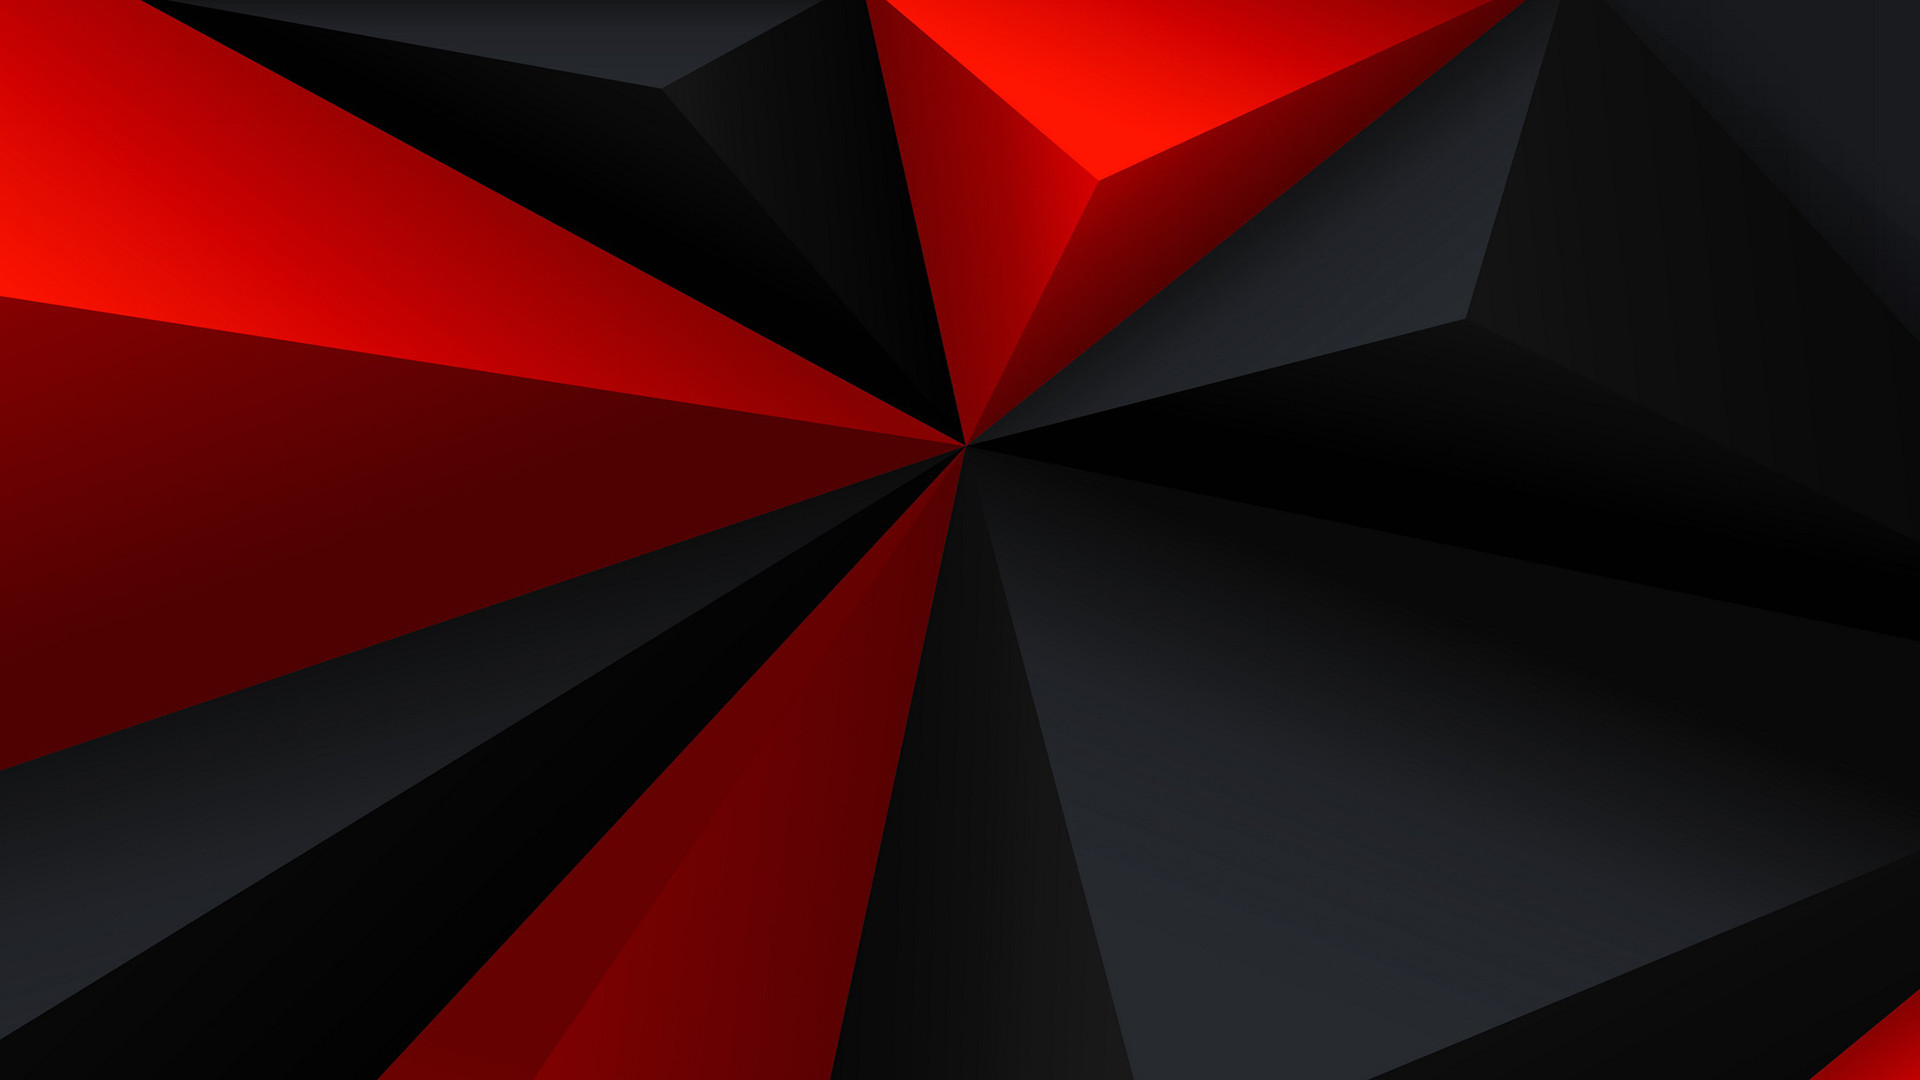 1920x1080 Red And Black Wallpapers Wallpapers) – HD Wallpapers